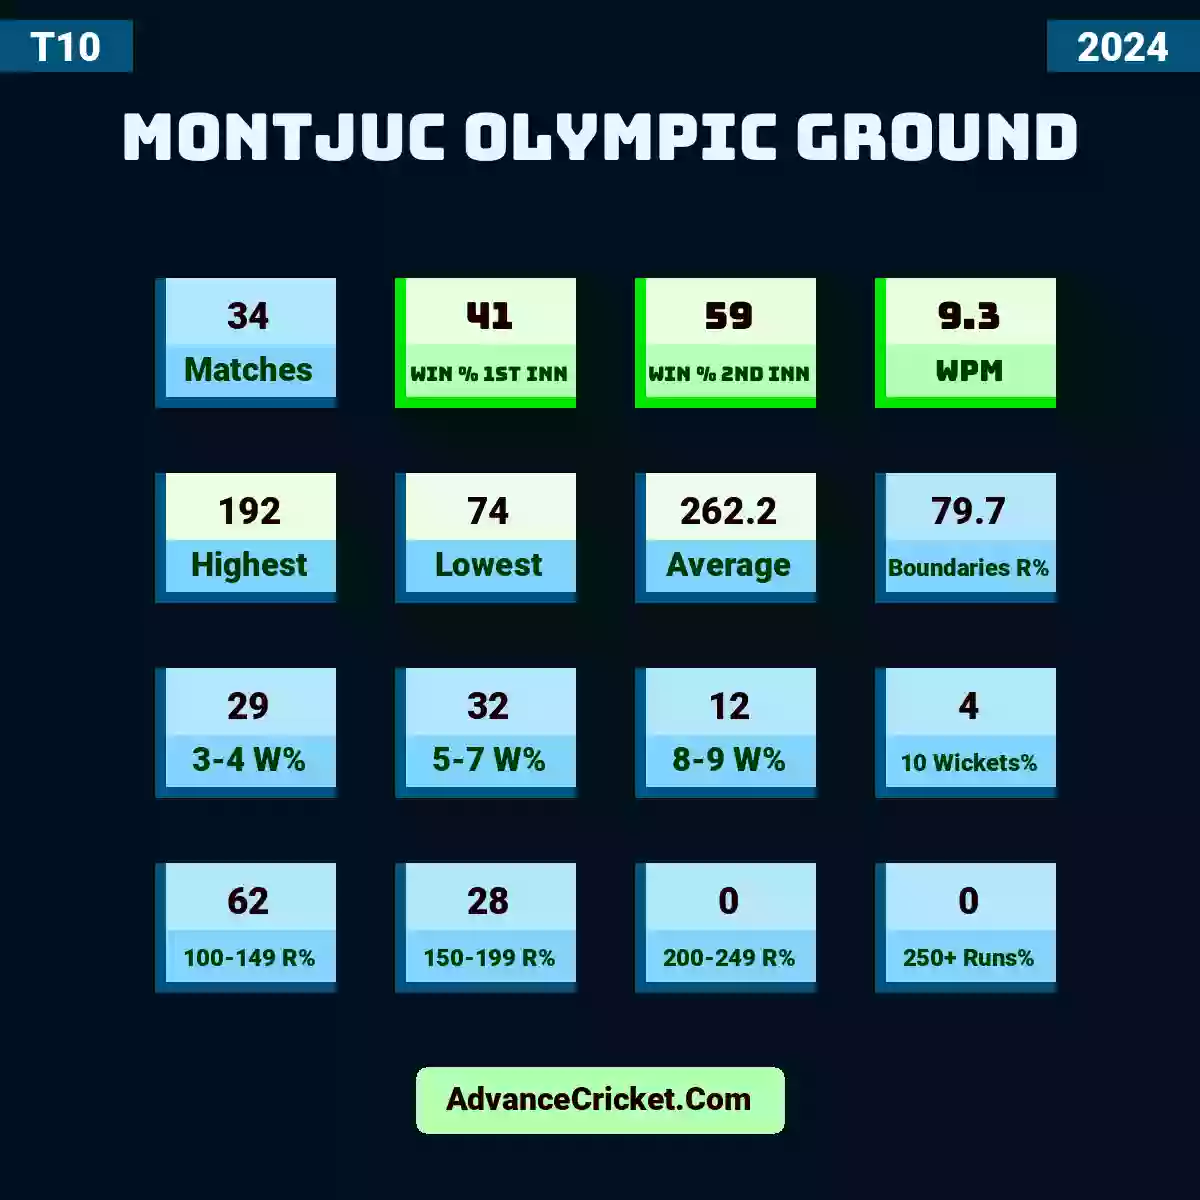 Image showing Montjuc Olympic Ground with Matches: 34, Win % 1st Inn: 41, Win % 2nd Inn: 59, WPM: 9.3, Highest: 192, Lowest: 74, Average: 262.2, Boundaries R%: 79.7, 3-4 W%: 29, 5-7 W%: 32, 8-9 W%: 12, 10 Wickets%: 4, 100-149 R%: 62, 150-199 R%: 28, 200-249 R%: 0, 250+ Runs%: 0.